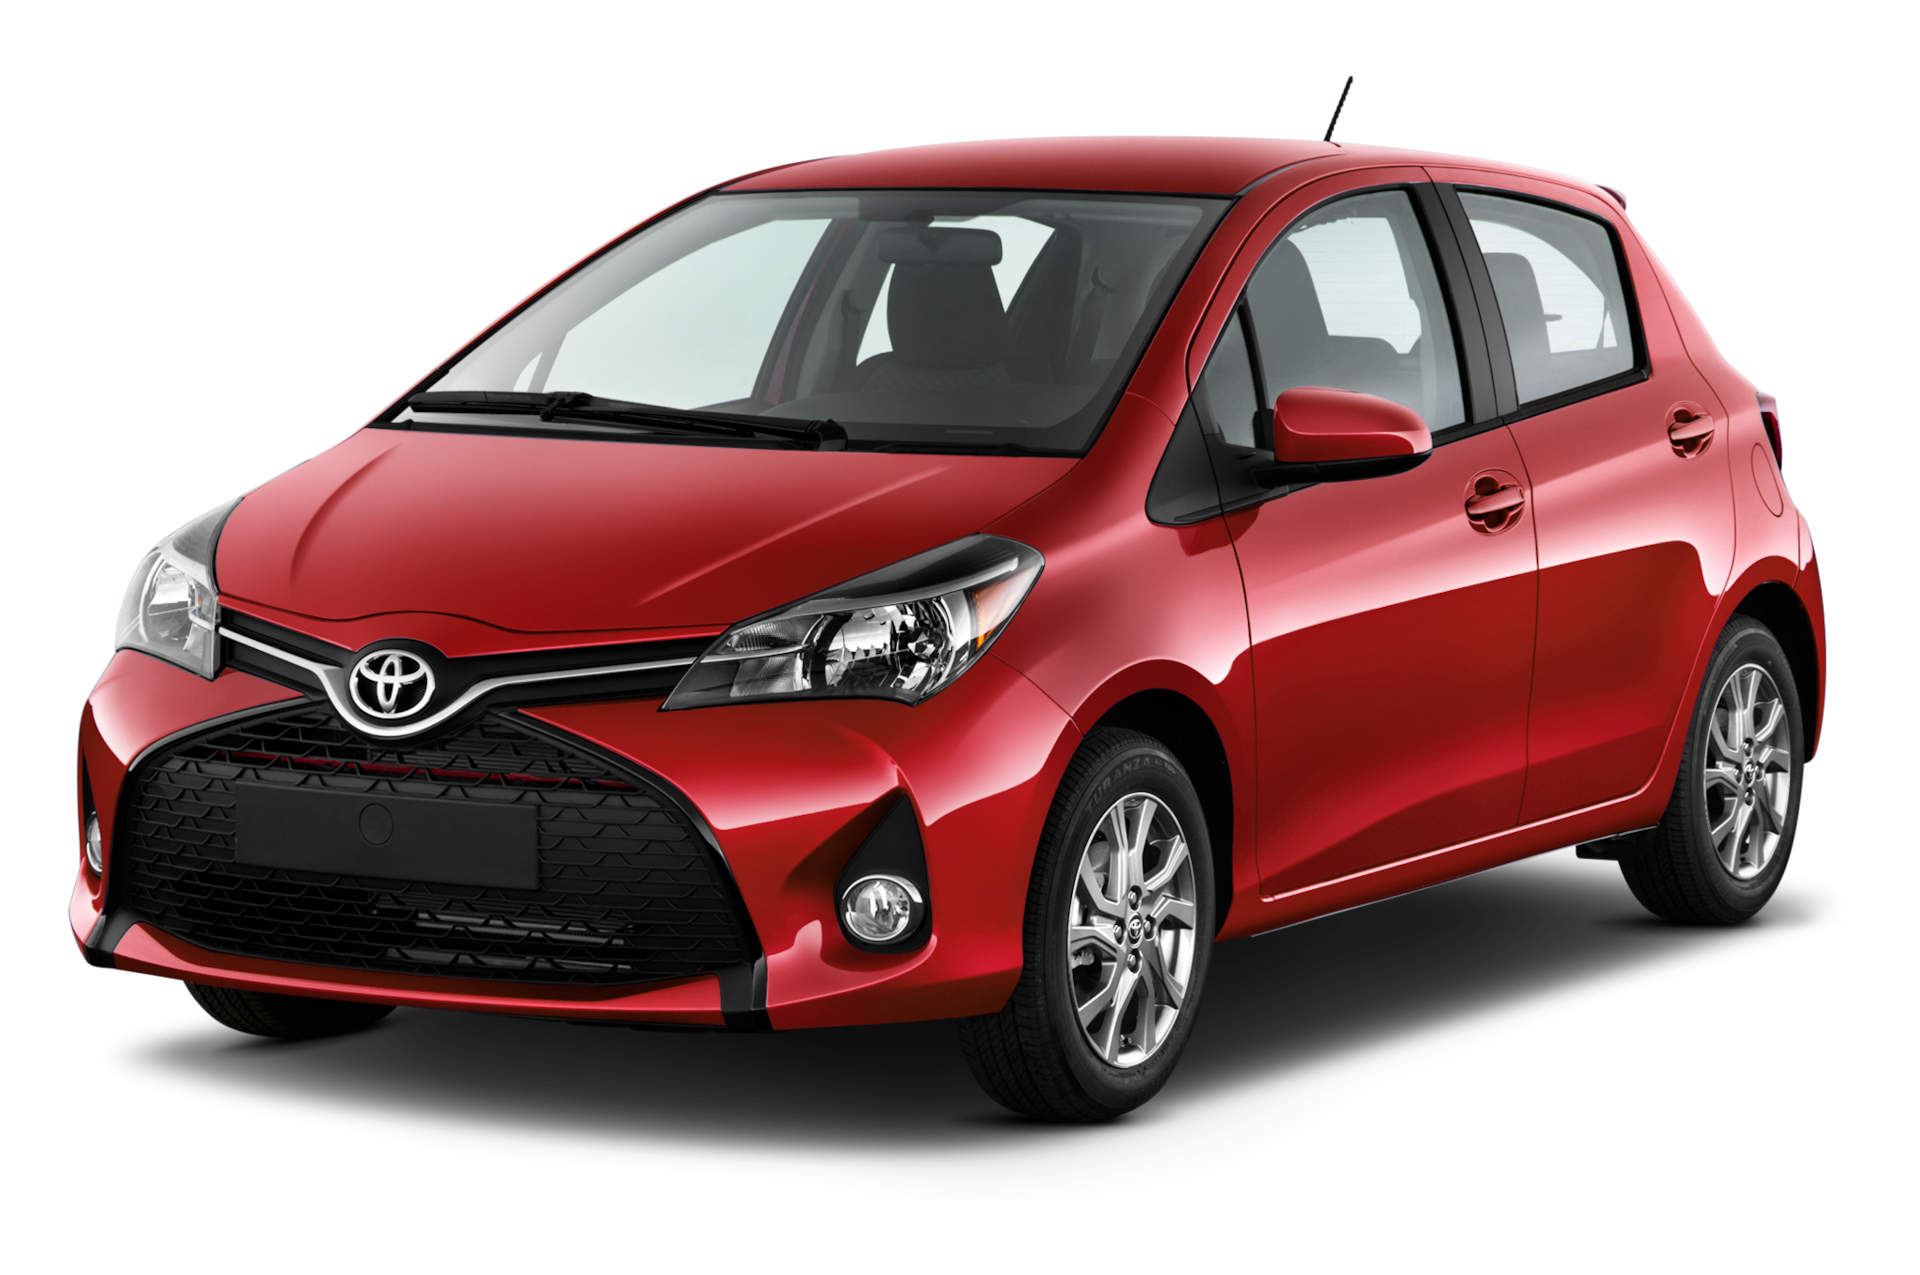 2017 Toyota Yaris Prices, Reviews, and Photos - MotorTrend